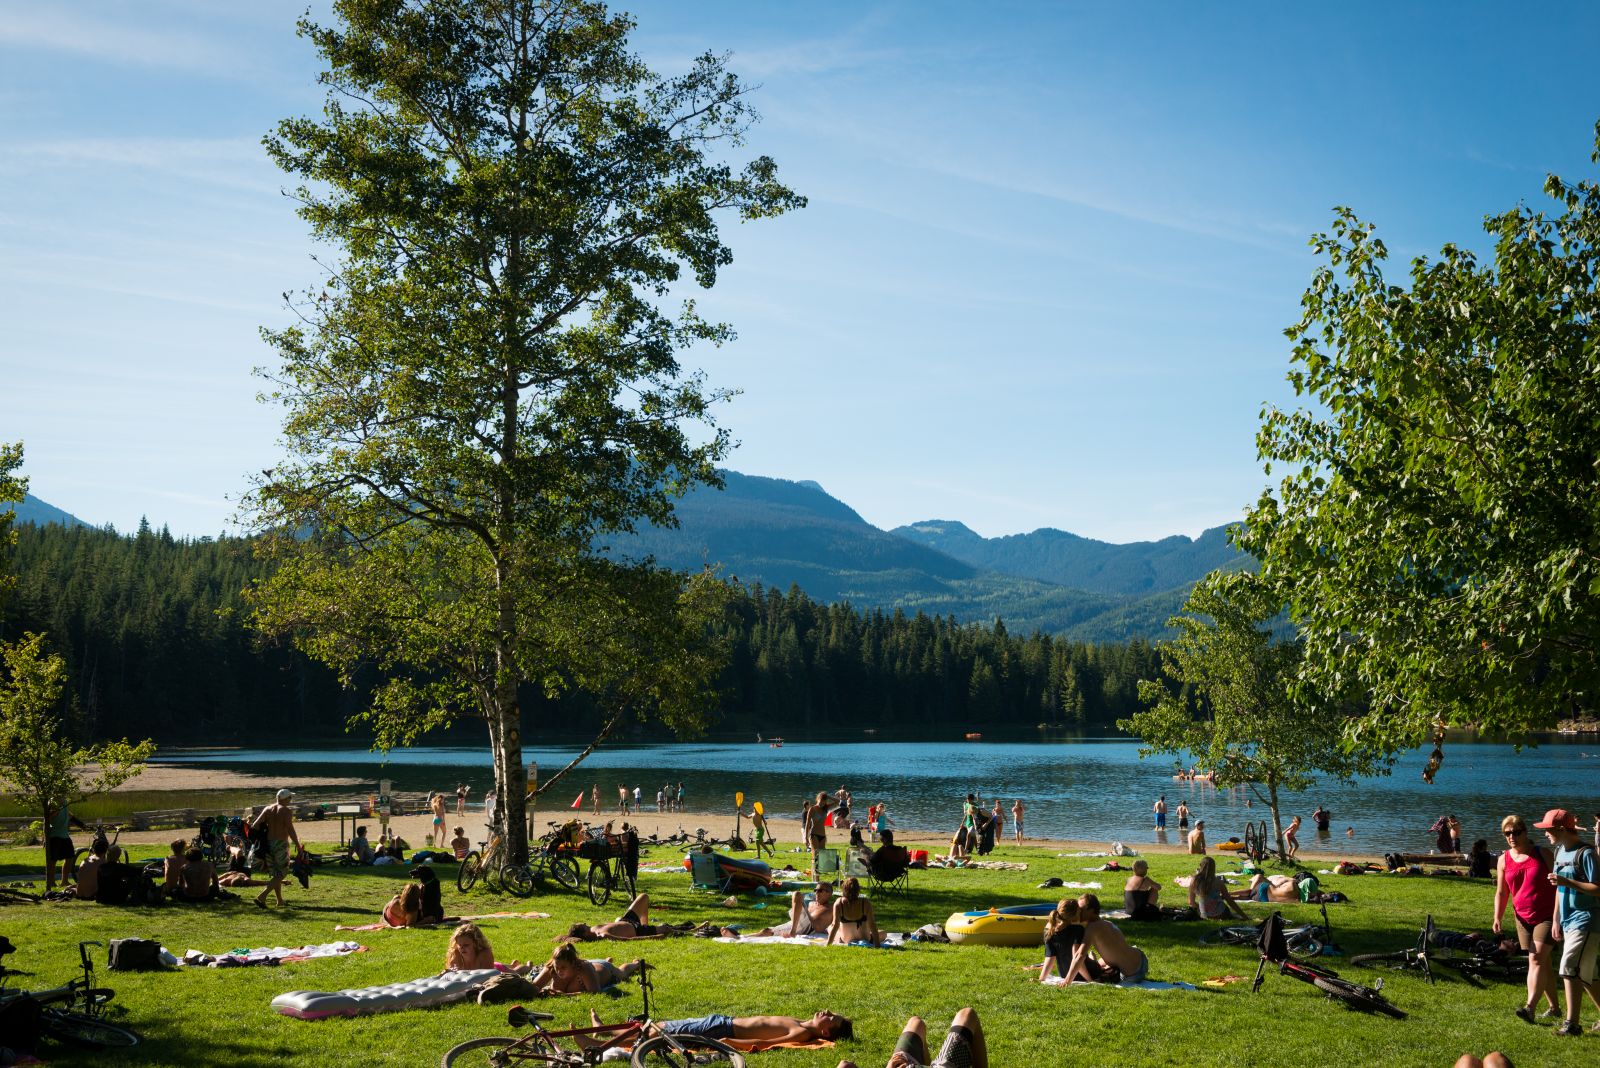 Beach at Lost Lake in Whistler